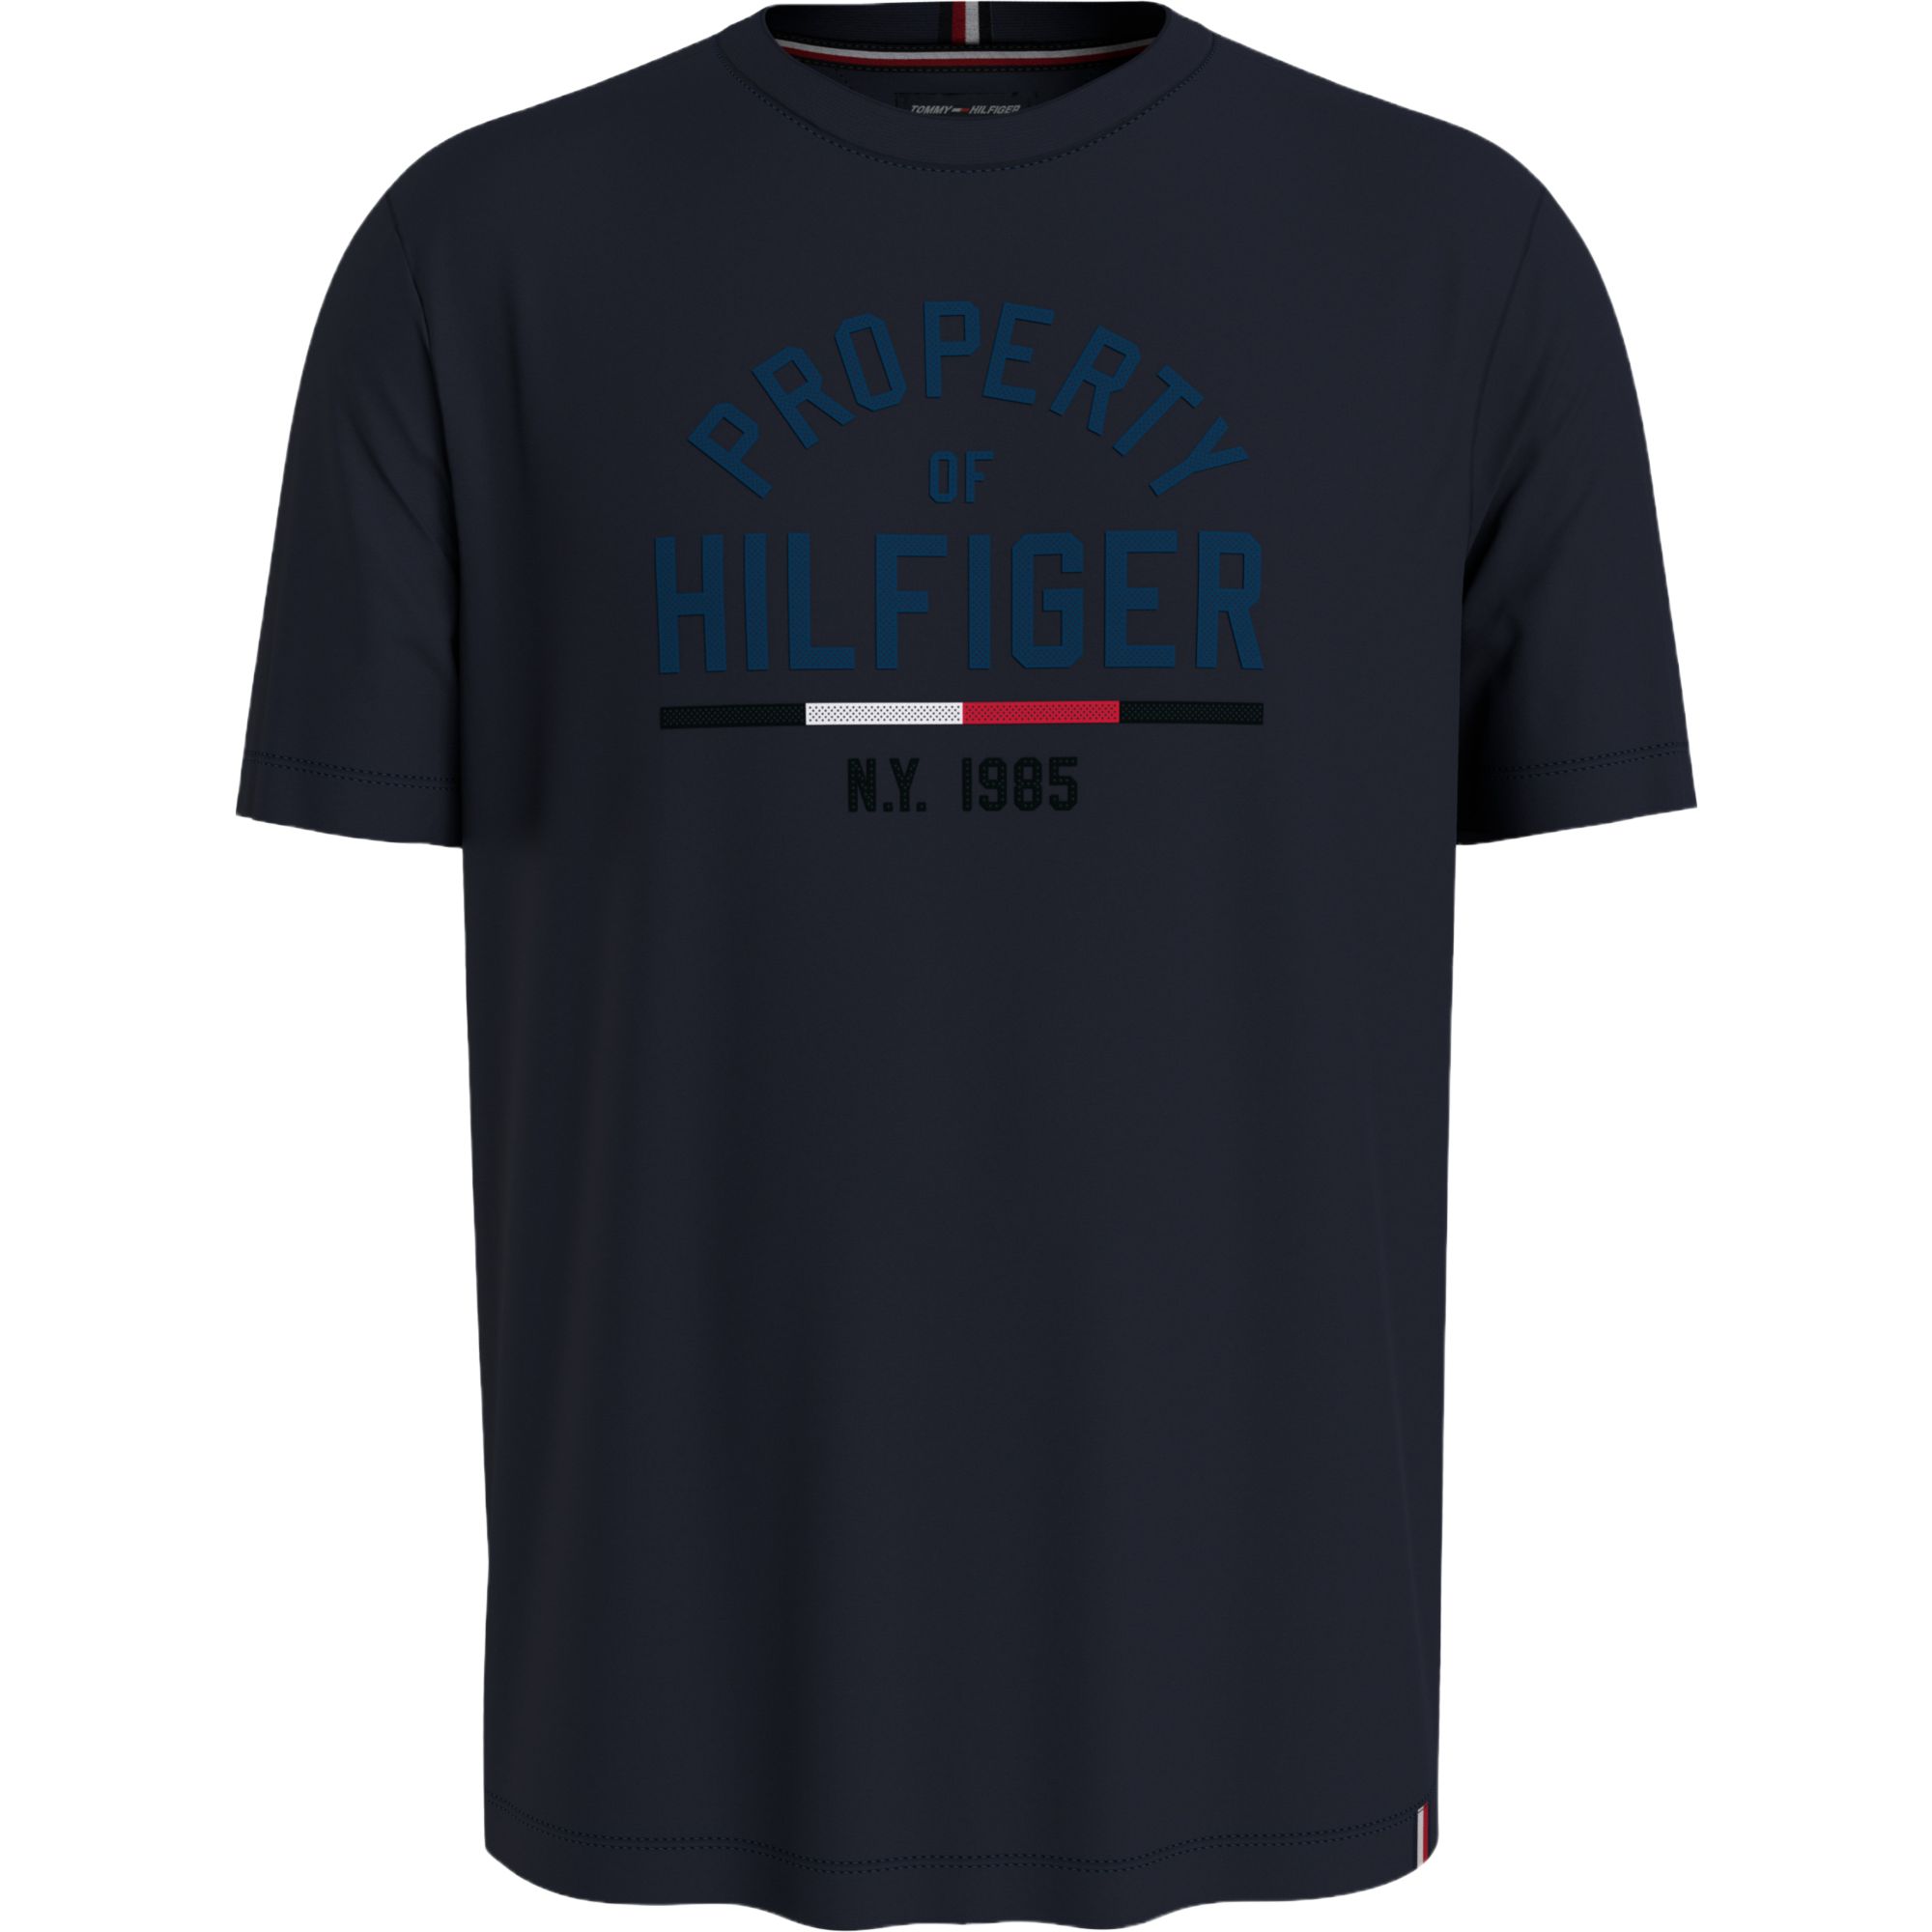 Graphic S/s Tommy Hilfiger - 3274246